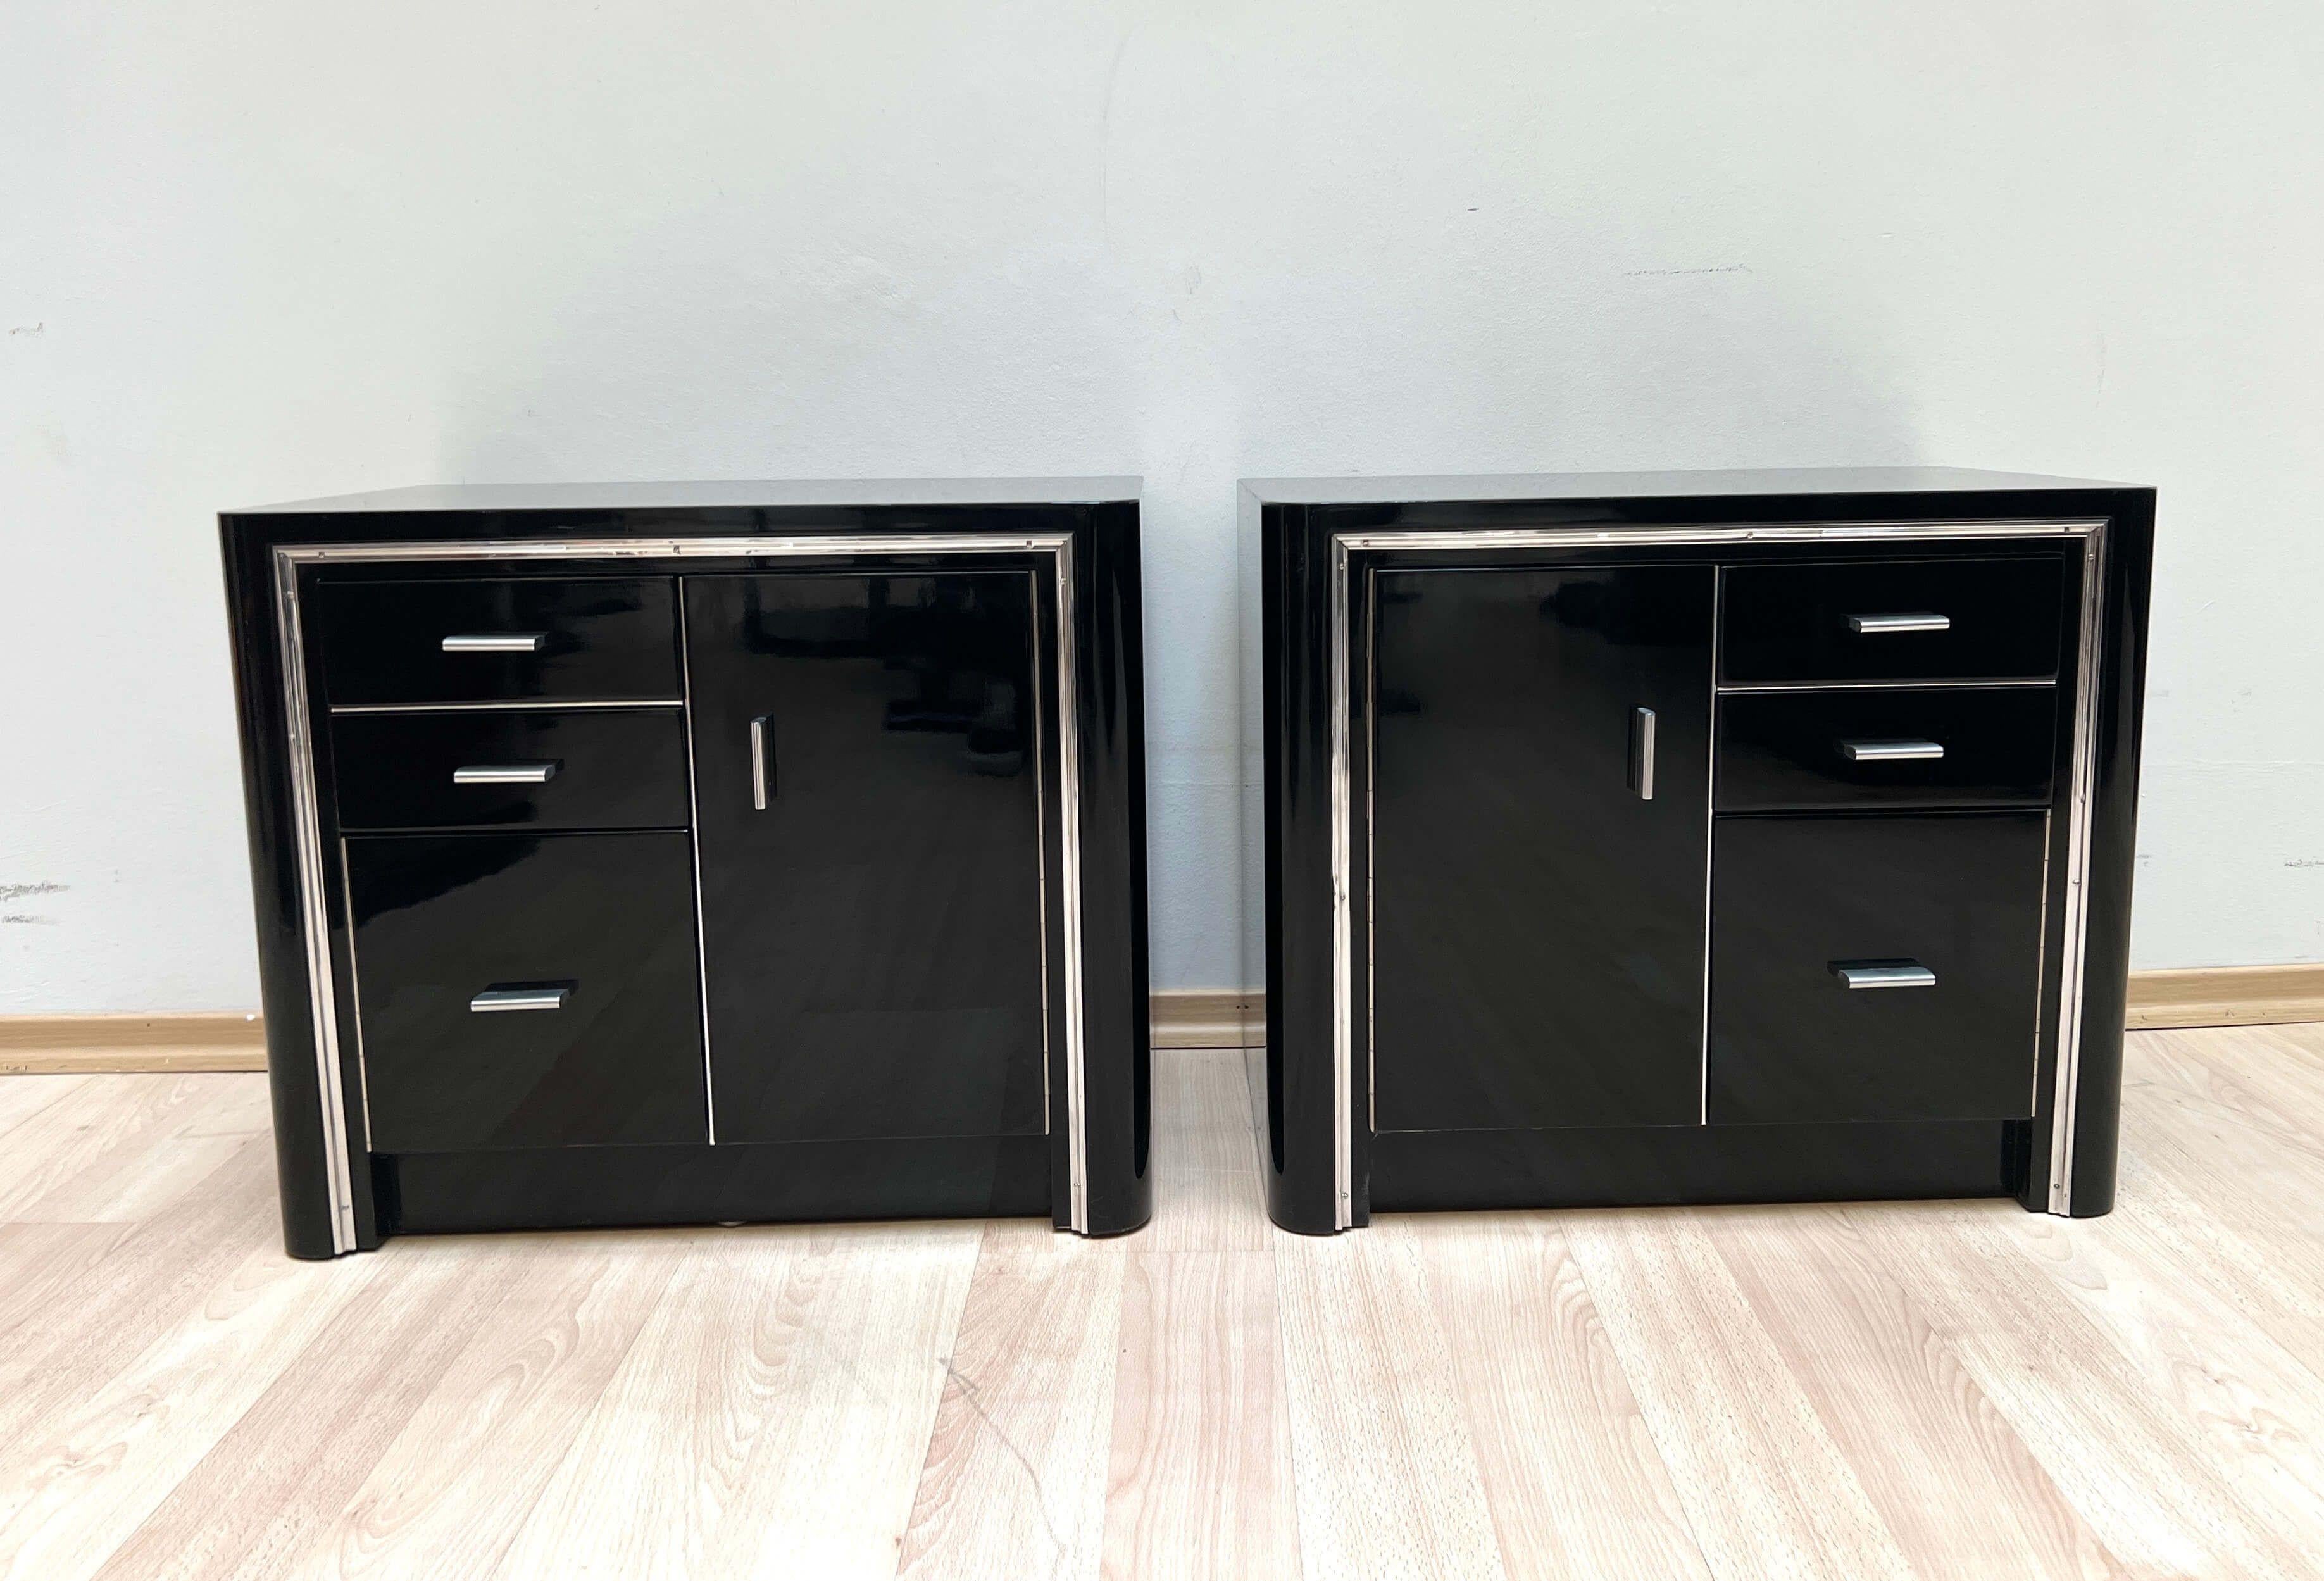 Pair of original Art Deco nightstands in black lacquer and metal.

Each with 2 drawers and 2 doors. Black high gloss lacquer. Brushed stainless steel handles. Aluminum trim. Mahogany and maple interior.

Dimensions: H 50 x W 59 x D 38/40.